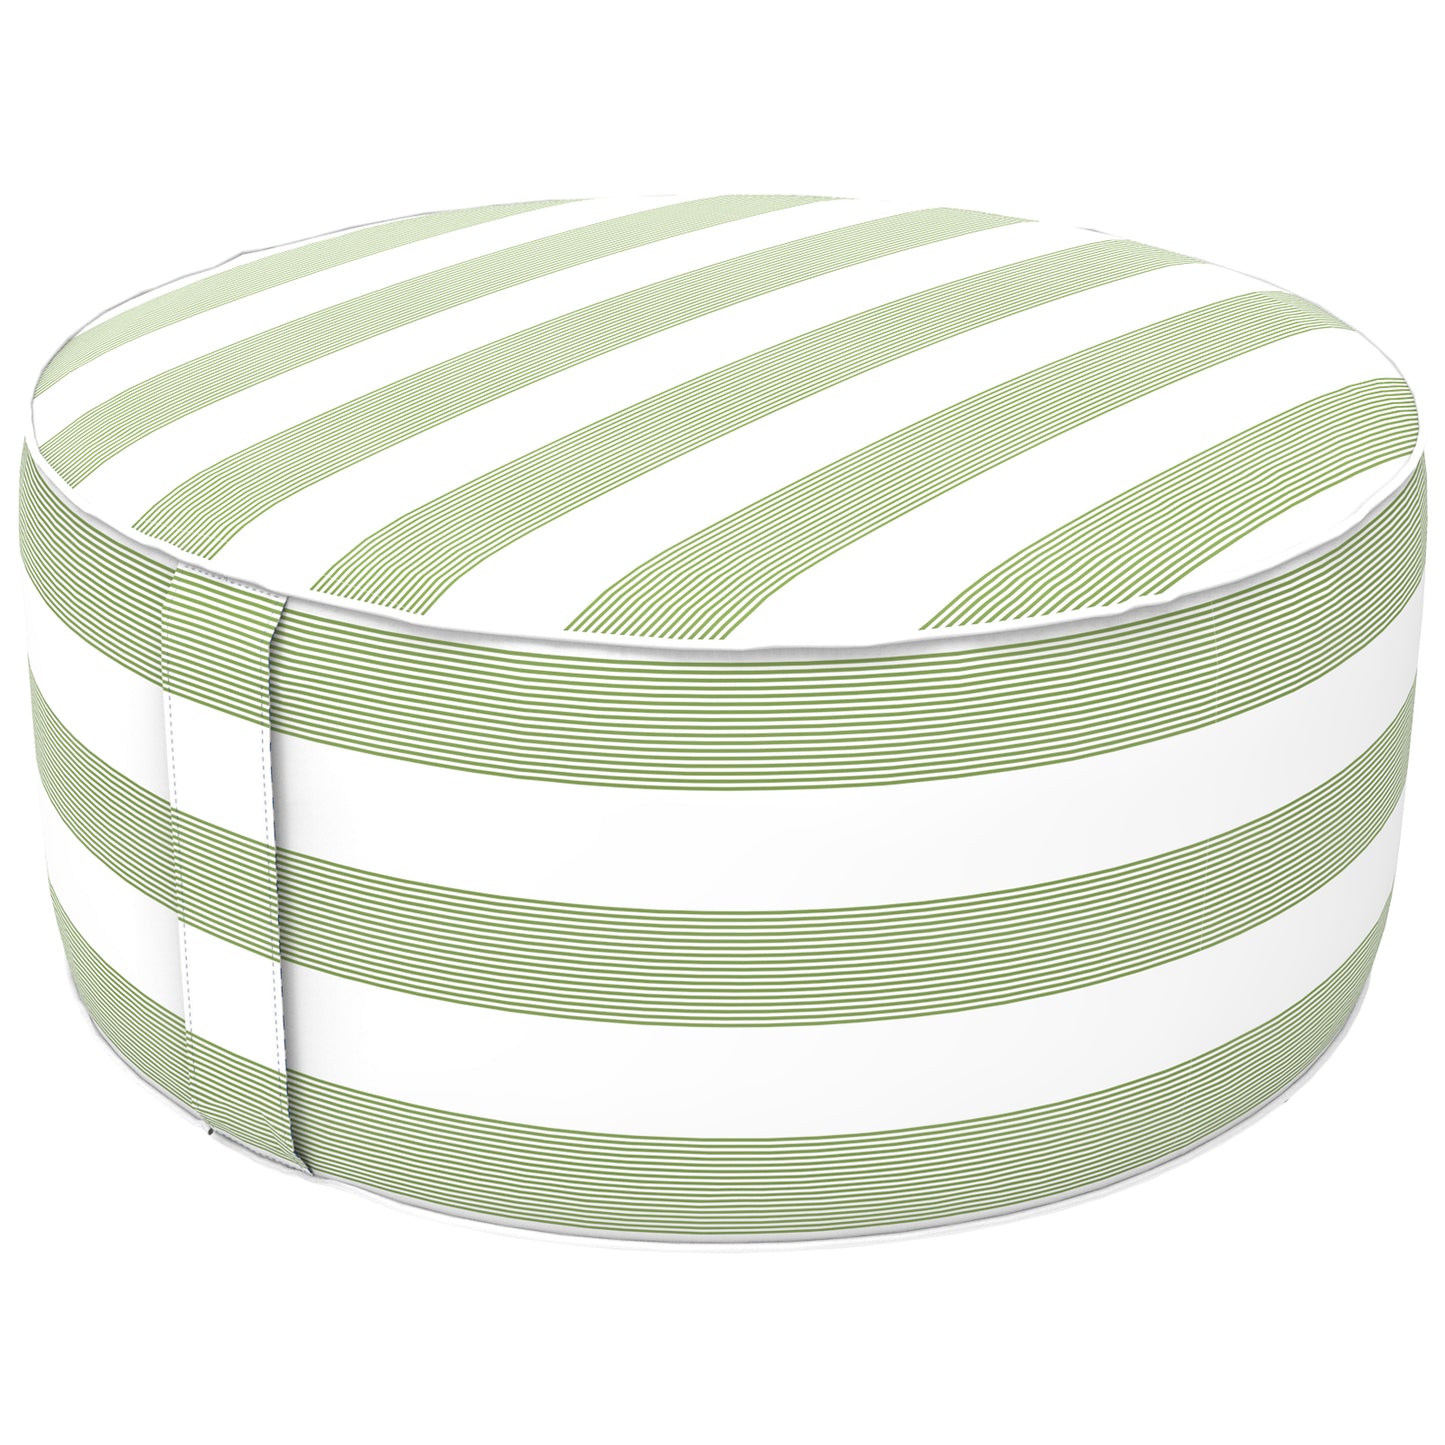 Outdoor Inflatable Stool Ottoman, All Weather Portable Footrest Stool, Furniture Stool Ottomans for Home Garden Beach, D31”xH14”, Stripe Cabana Green